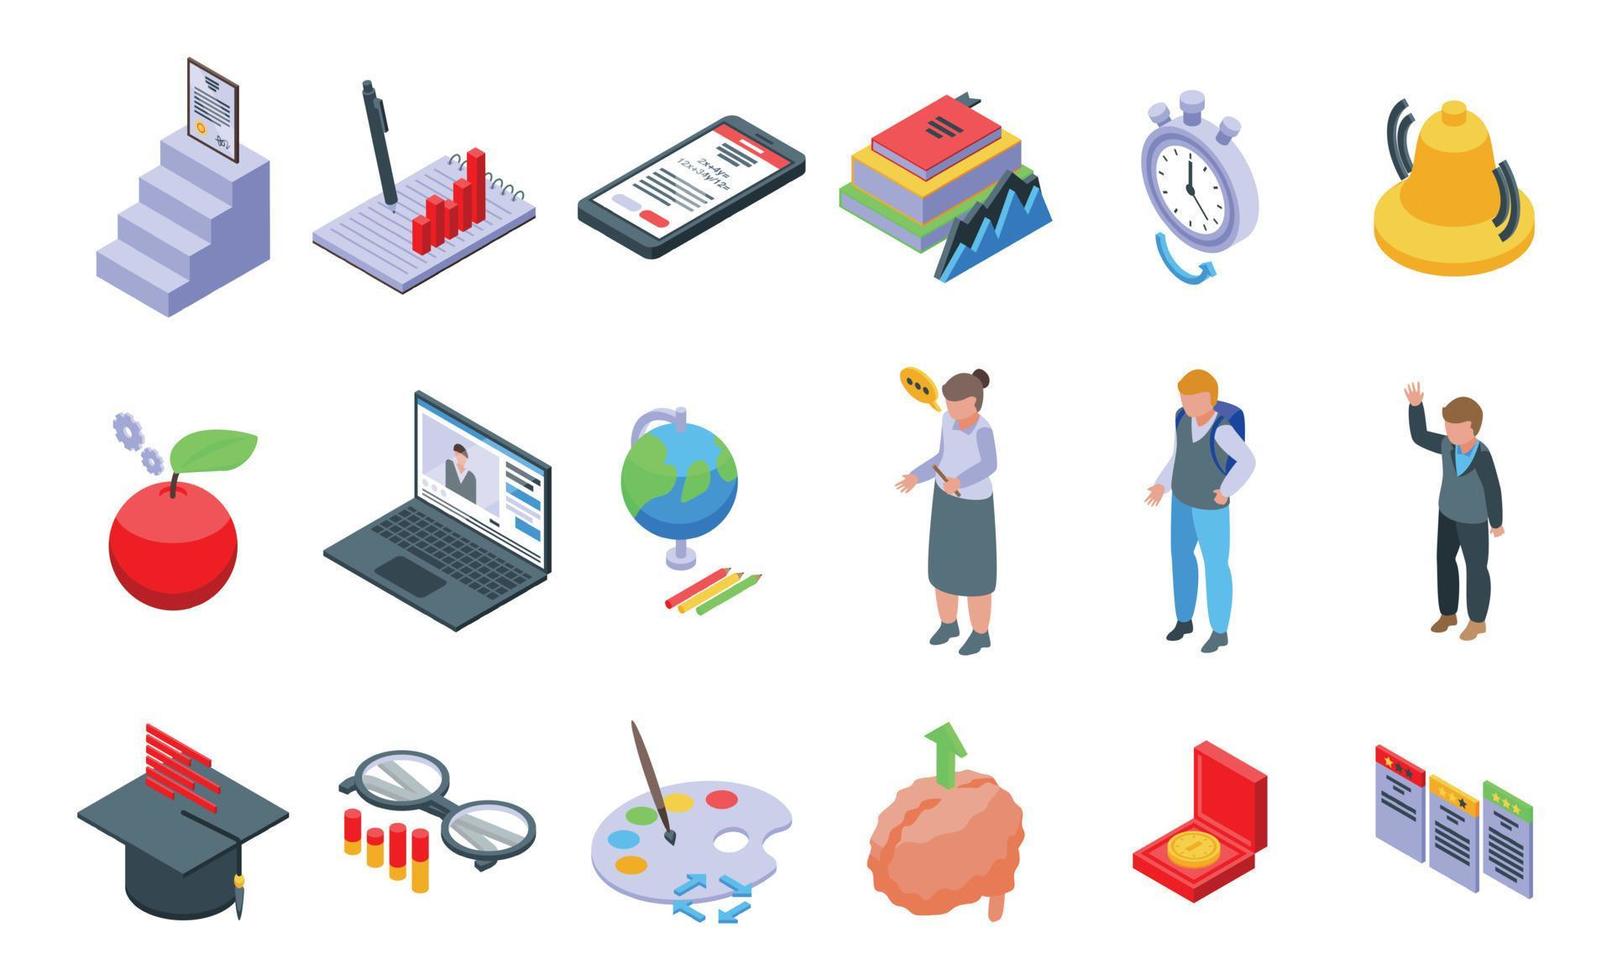 Education workflow icons set, isometric style vector